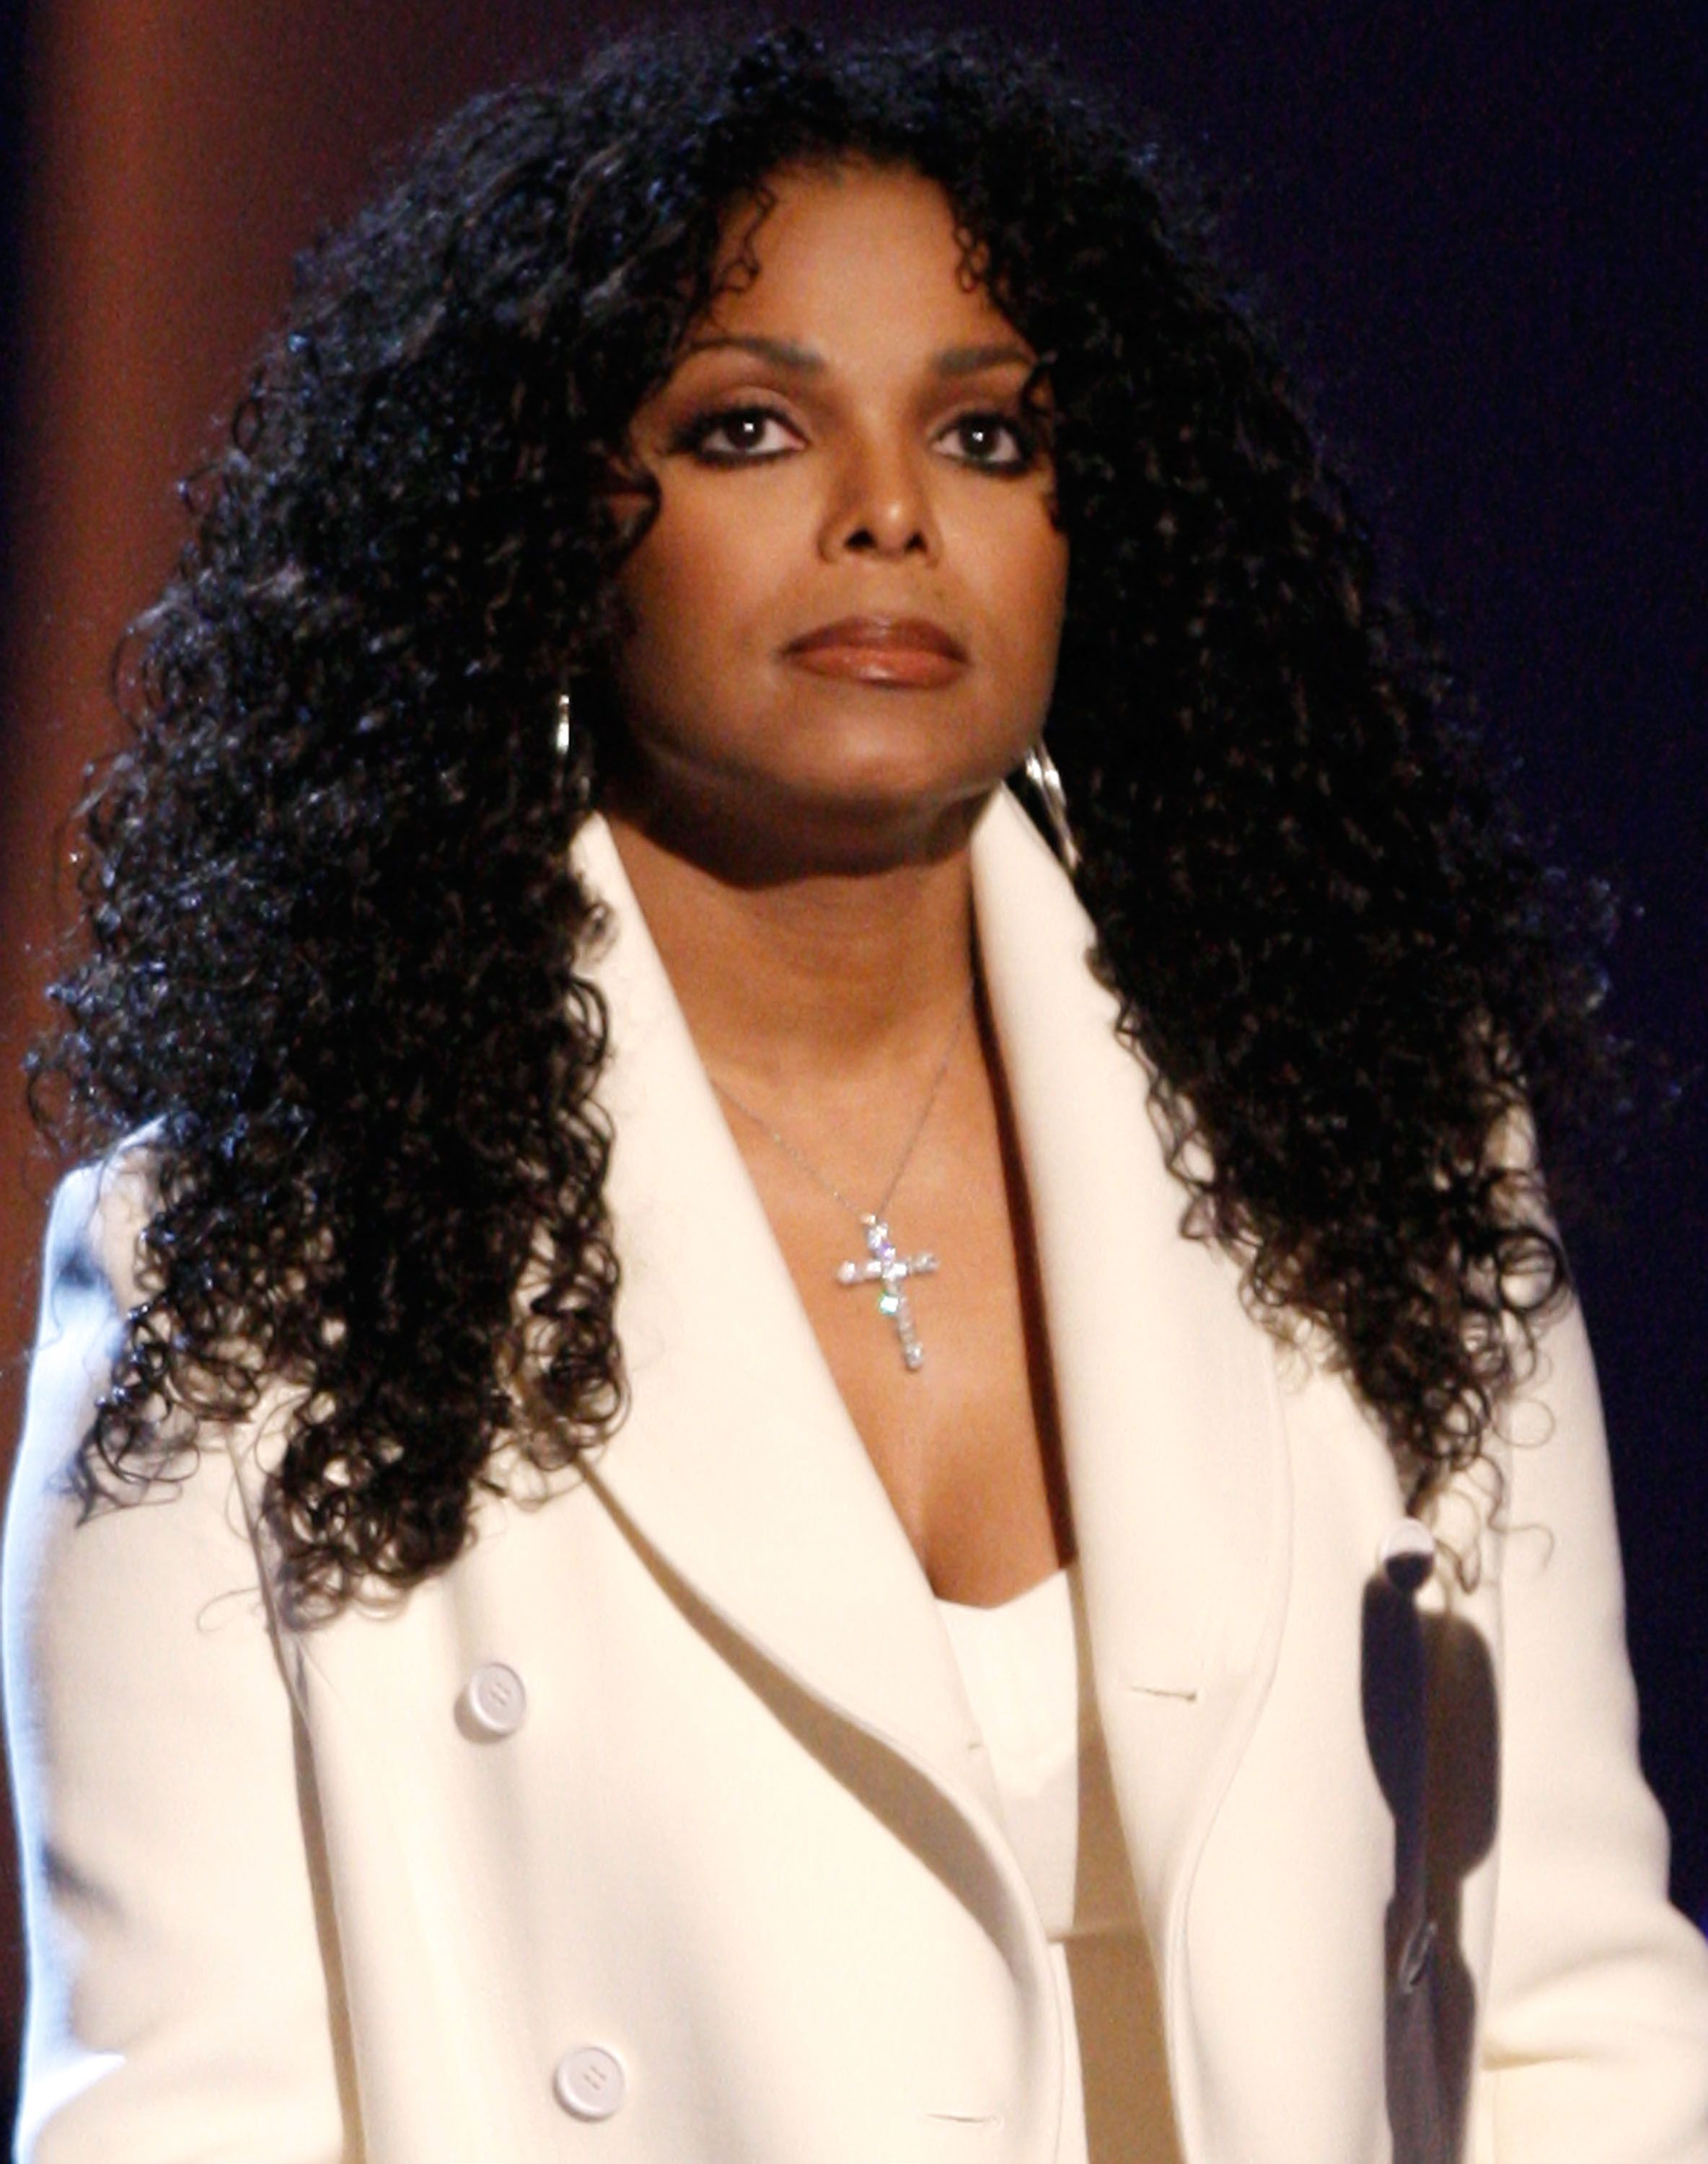 Janet Jackson at the 2009 BET Awards held at the Shrine Auditorium on June 28, 2009 in Los Angeles, California. | Source: Getty Images